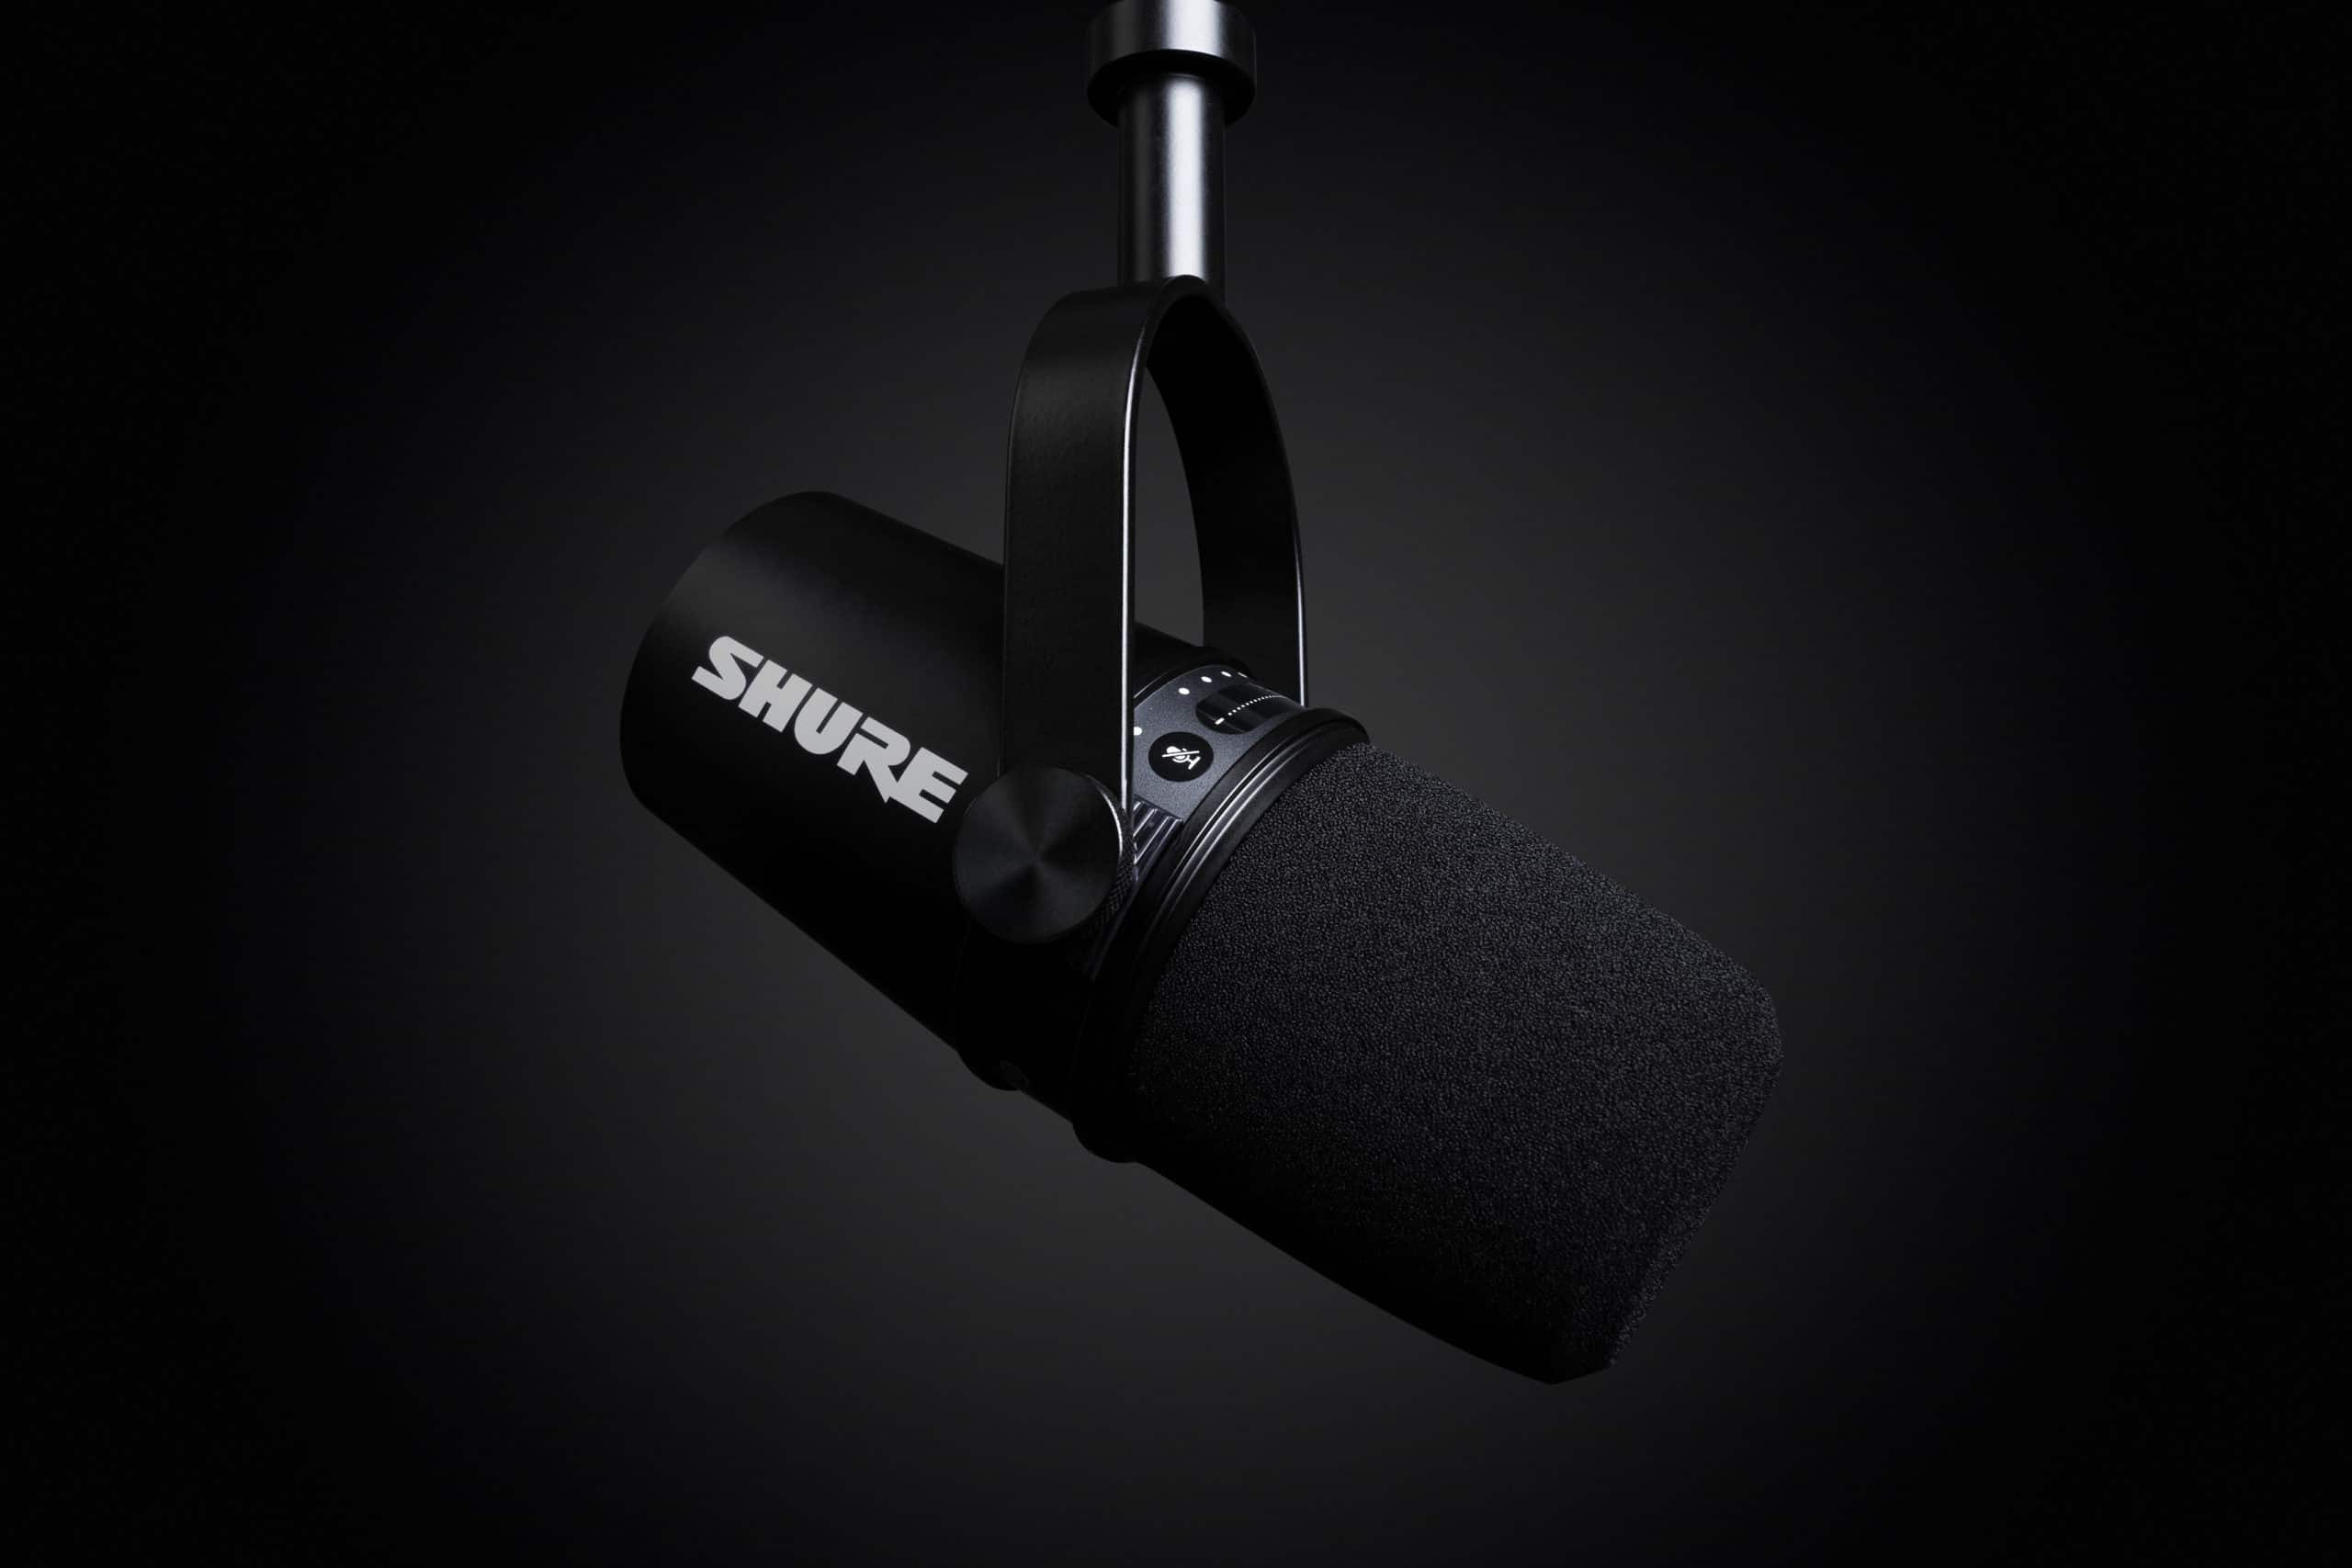 SHURE MV7 podcast microphone launches in the UAE, taking recording and streaming to the next level